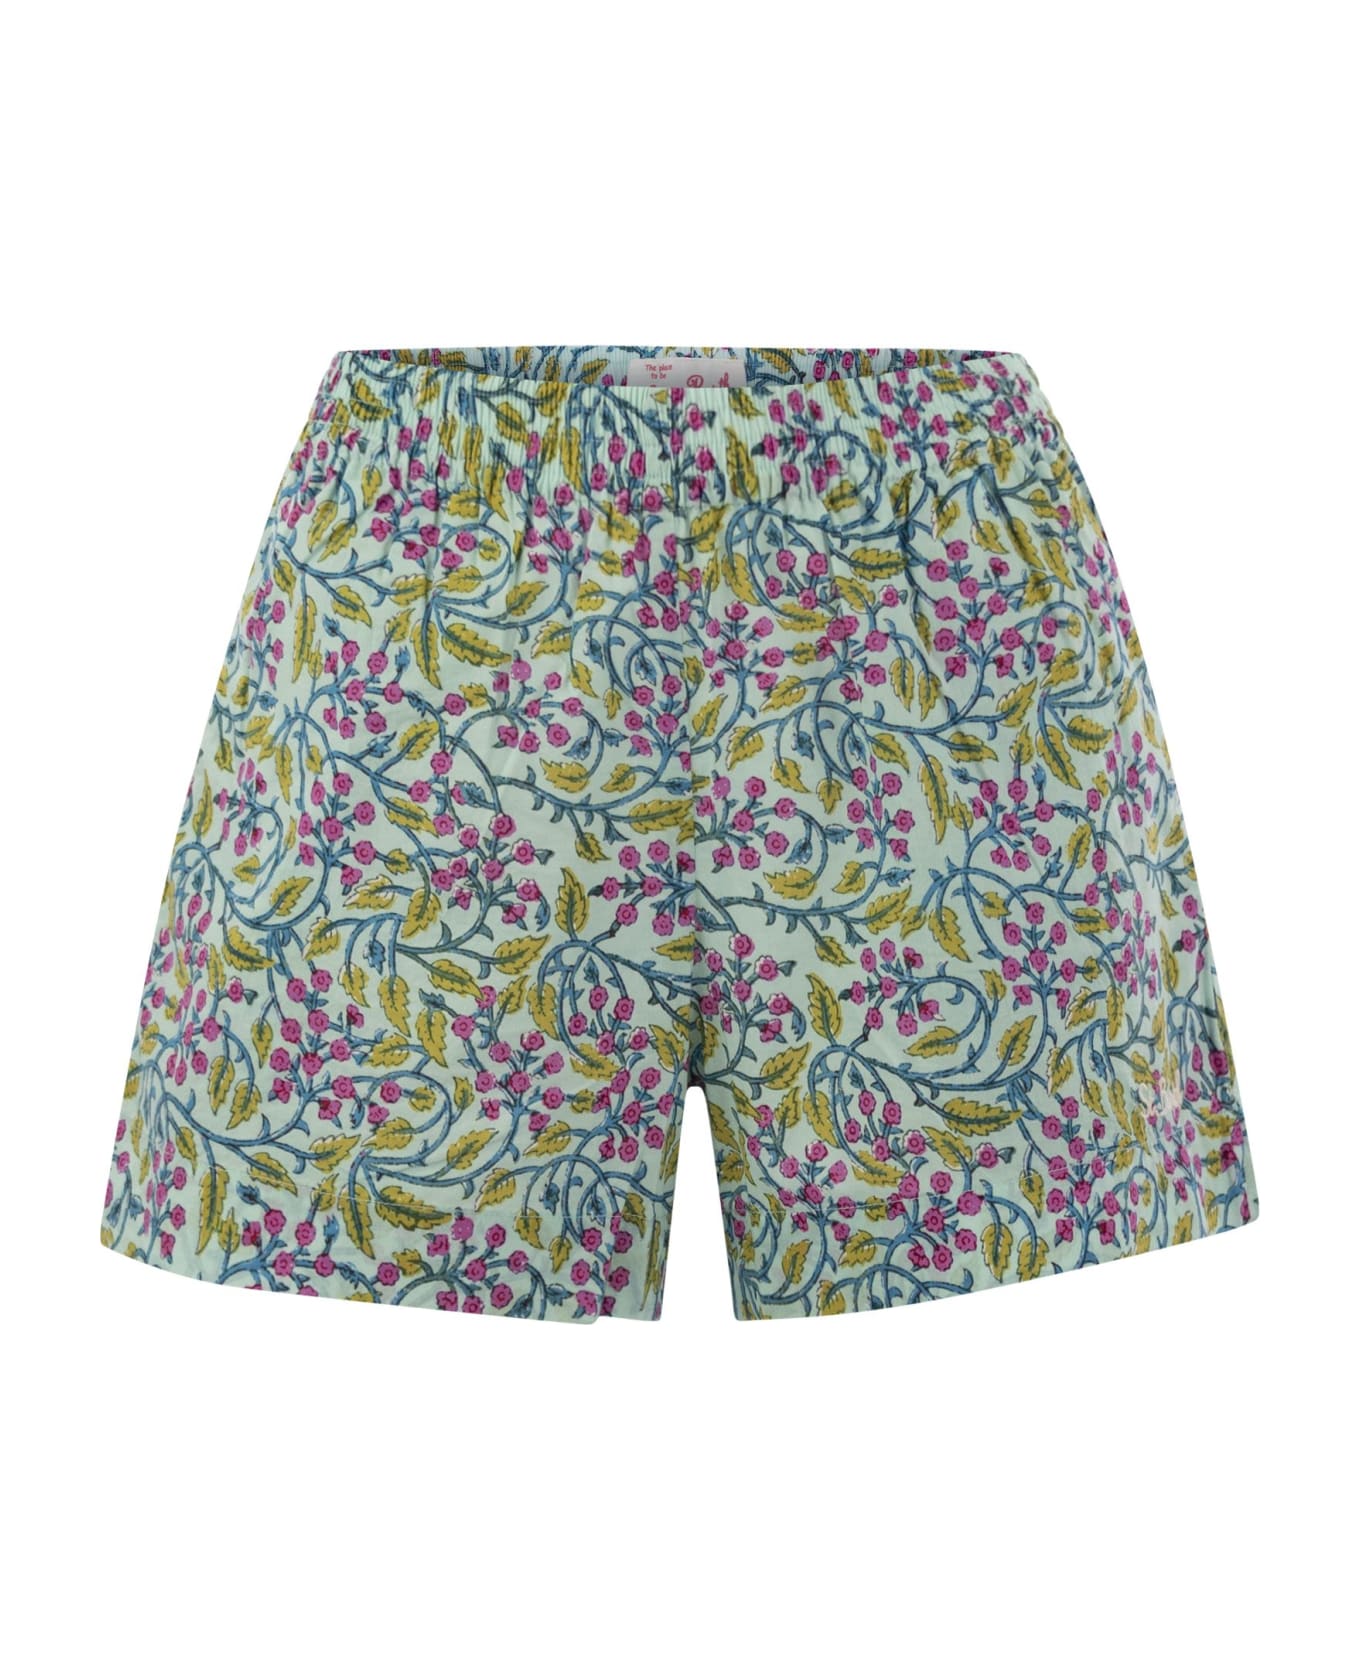 MC2 Saint Barth Meave - Cotton Shorts With Floral Pattern Short - MULTI